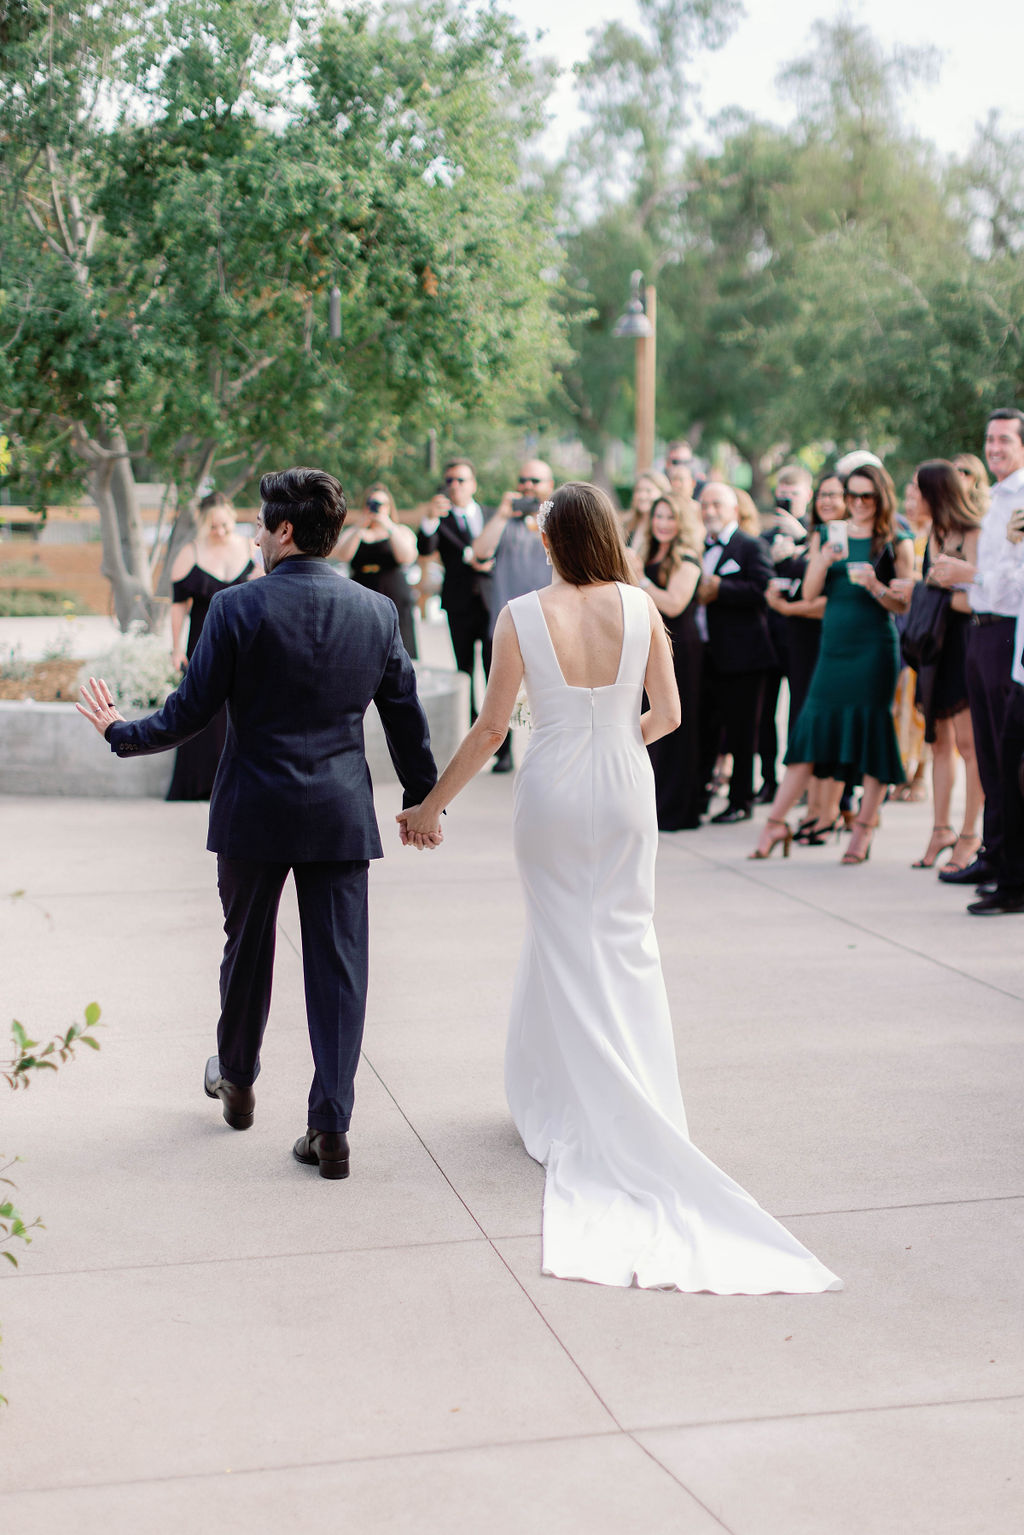 Groom and Bride wedding ceremony by Sarah Block Photography